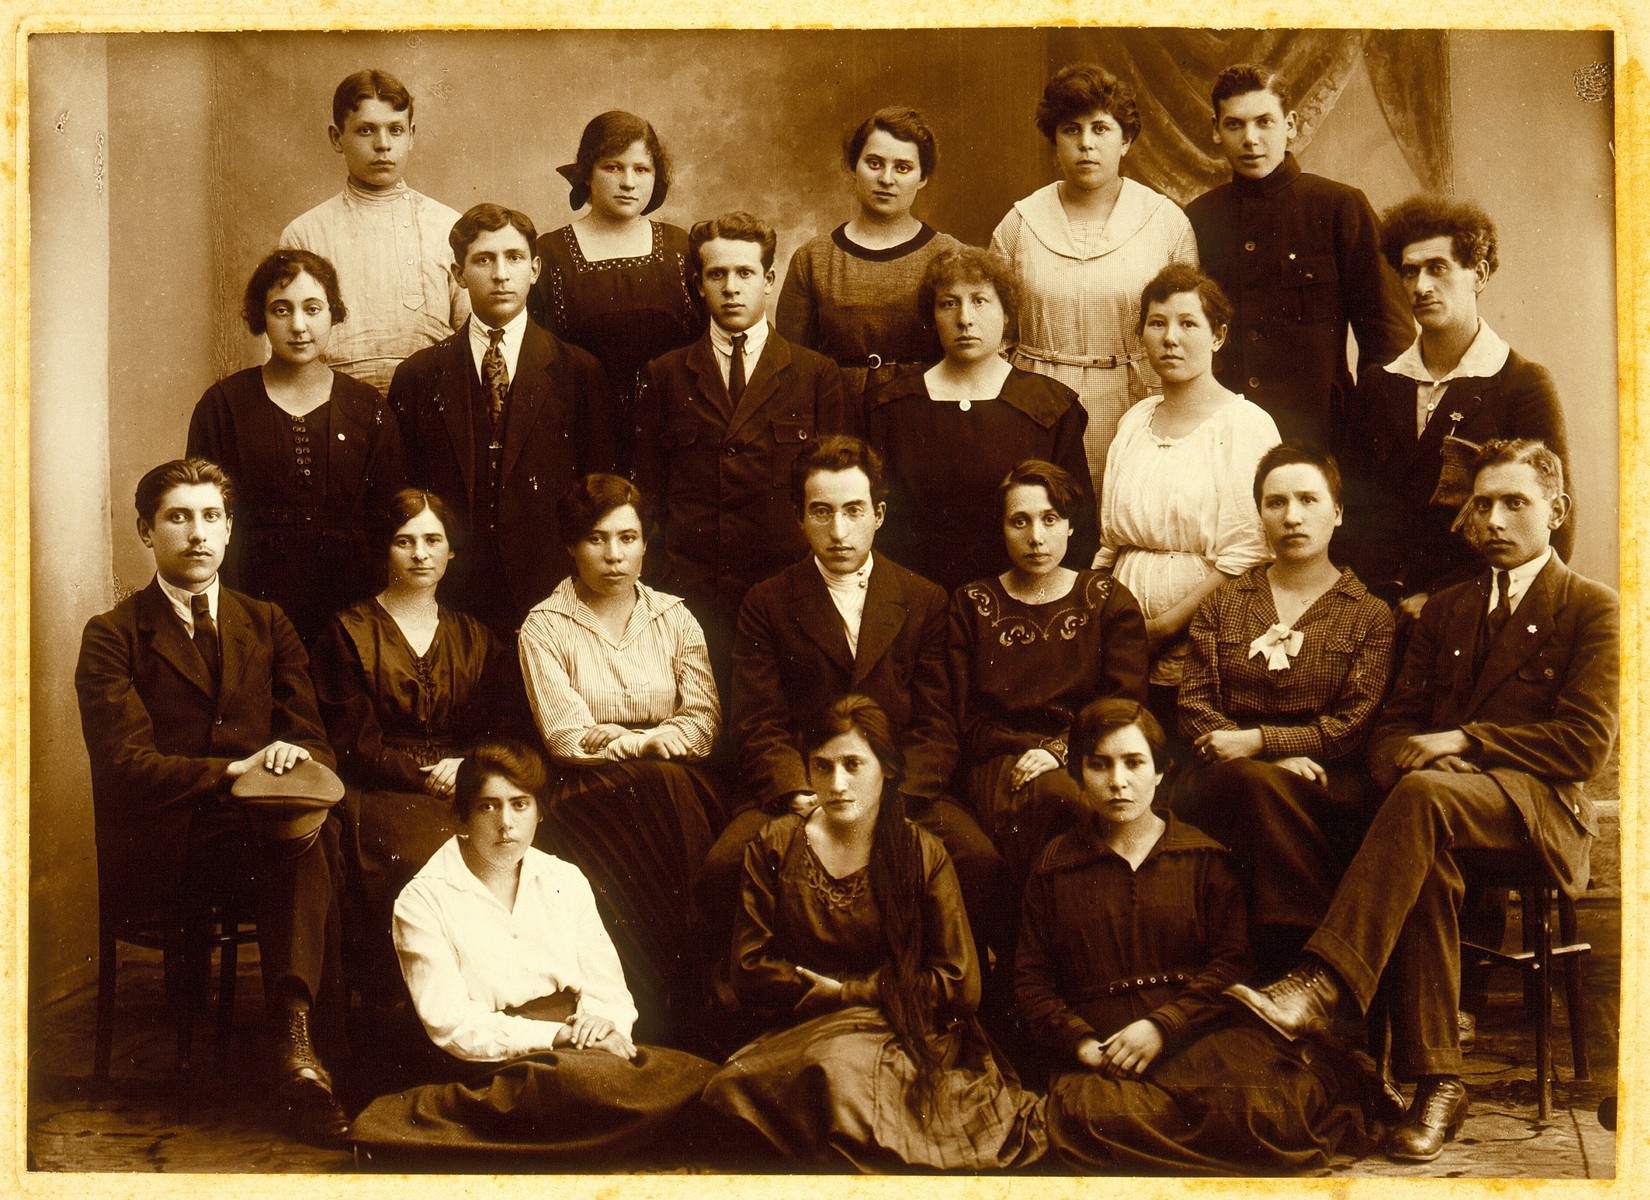 Group portrait of teachers in Vilna.  

Sarah Rubinstein (seated second row from bottom, third from left) immigrated to Palestine.  The fate of the other teachers is unknown.